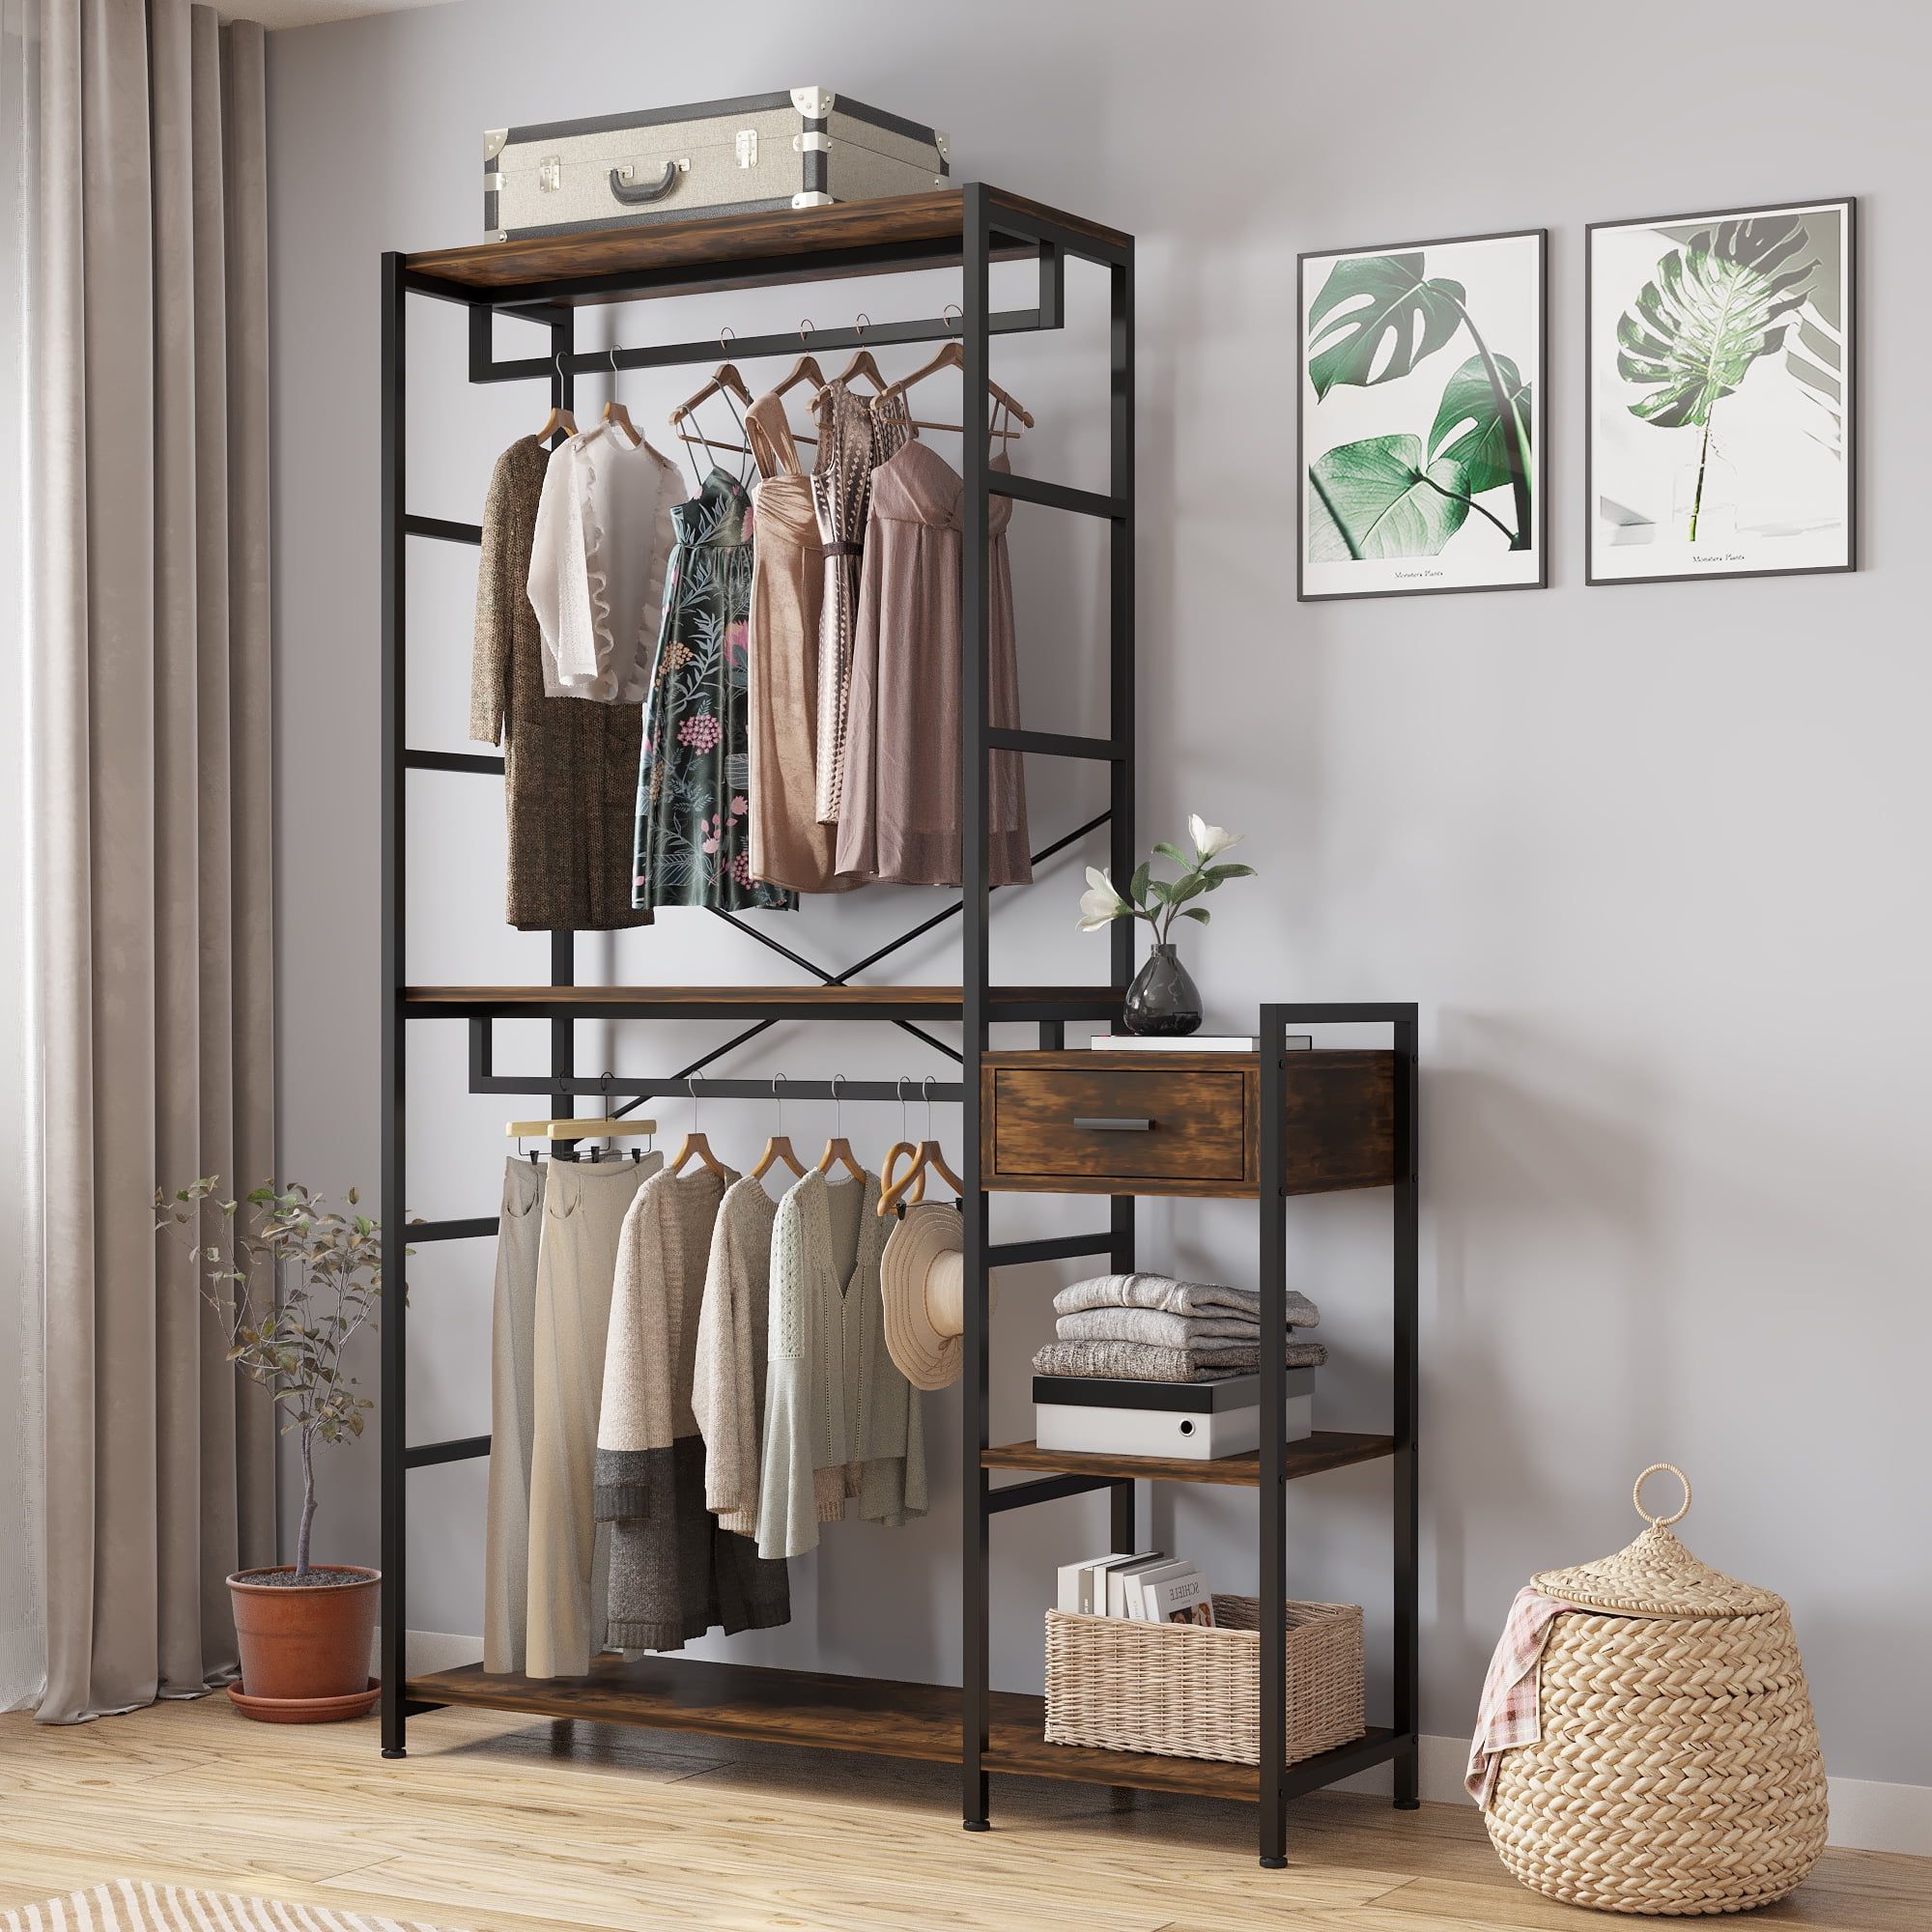 Ktaxon Heavy Duty Double Rods Clothing Garment Rack, Freestanding Closet  Organizer Portable Metal Wardrobe Rack With 5 Shelves And Storage Drawer,  Rustic Brown – Walmart For Wardrobes With Double Hanging Rail (Gallery 18 of 20)